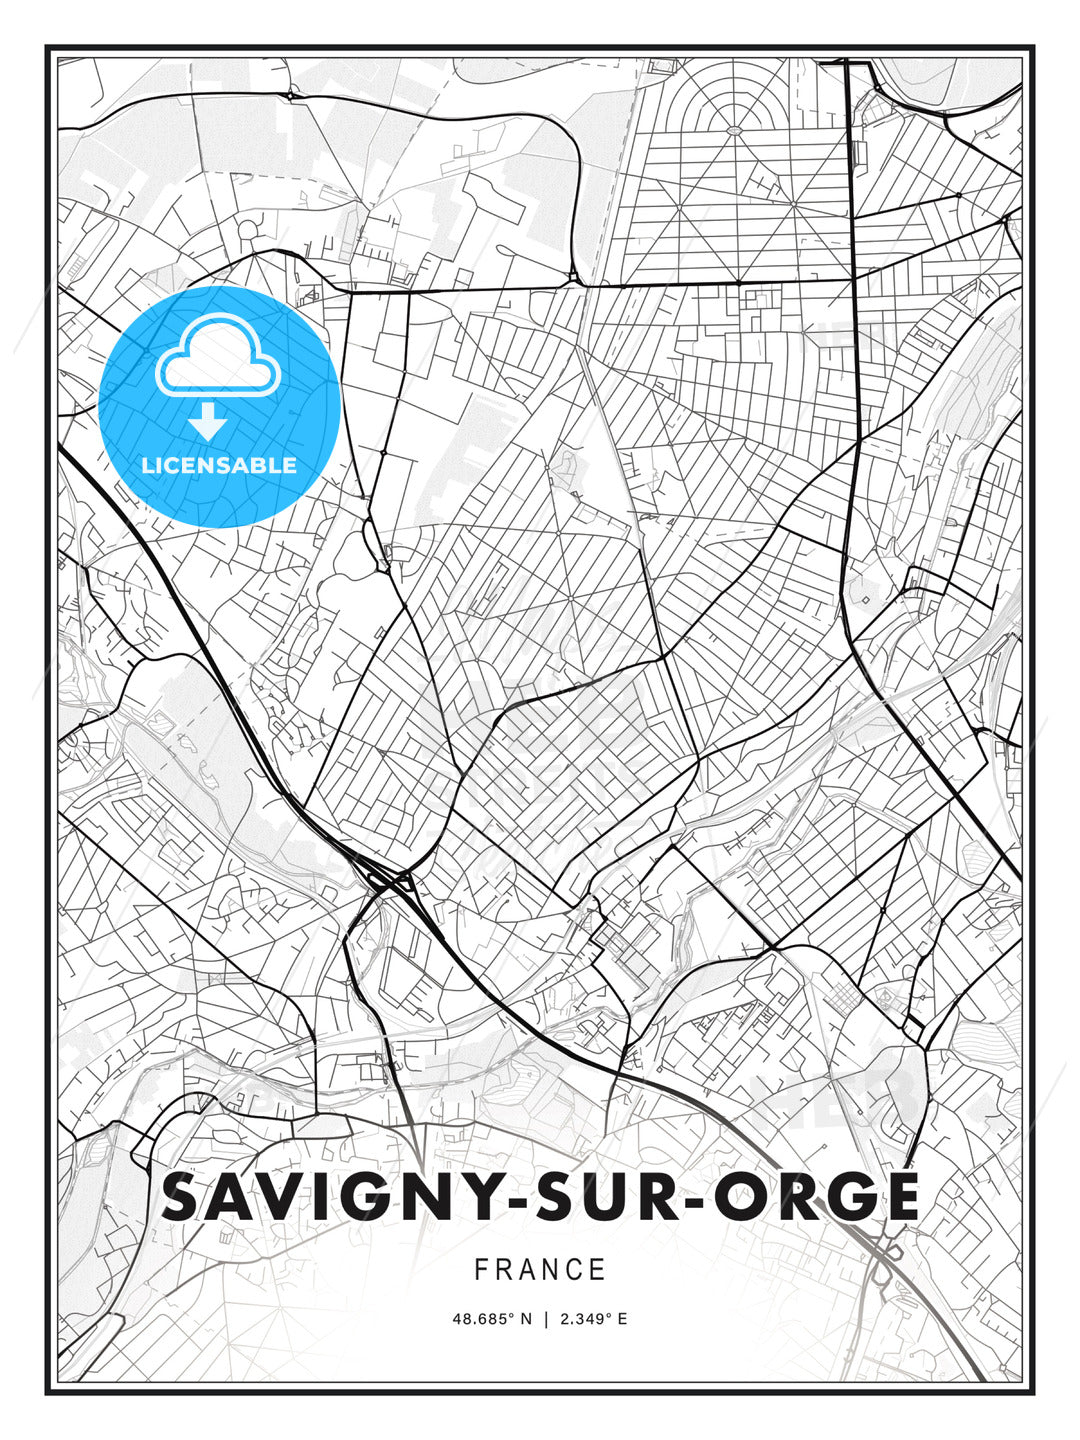 Savigny-sur-Orge, France, Modern Print Template in Various Formats - HEBSTREITS Sketches